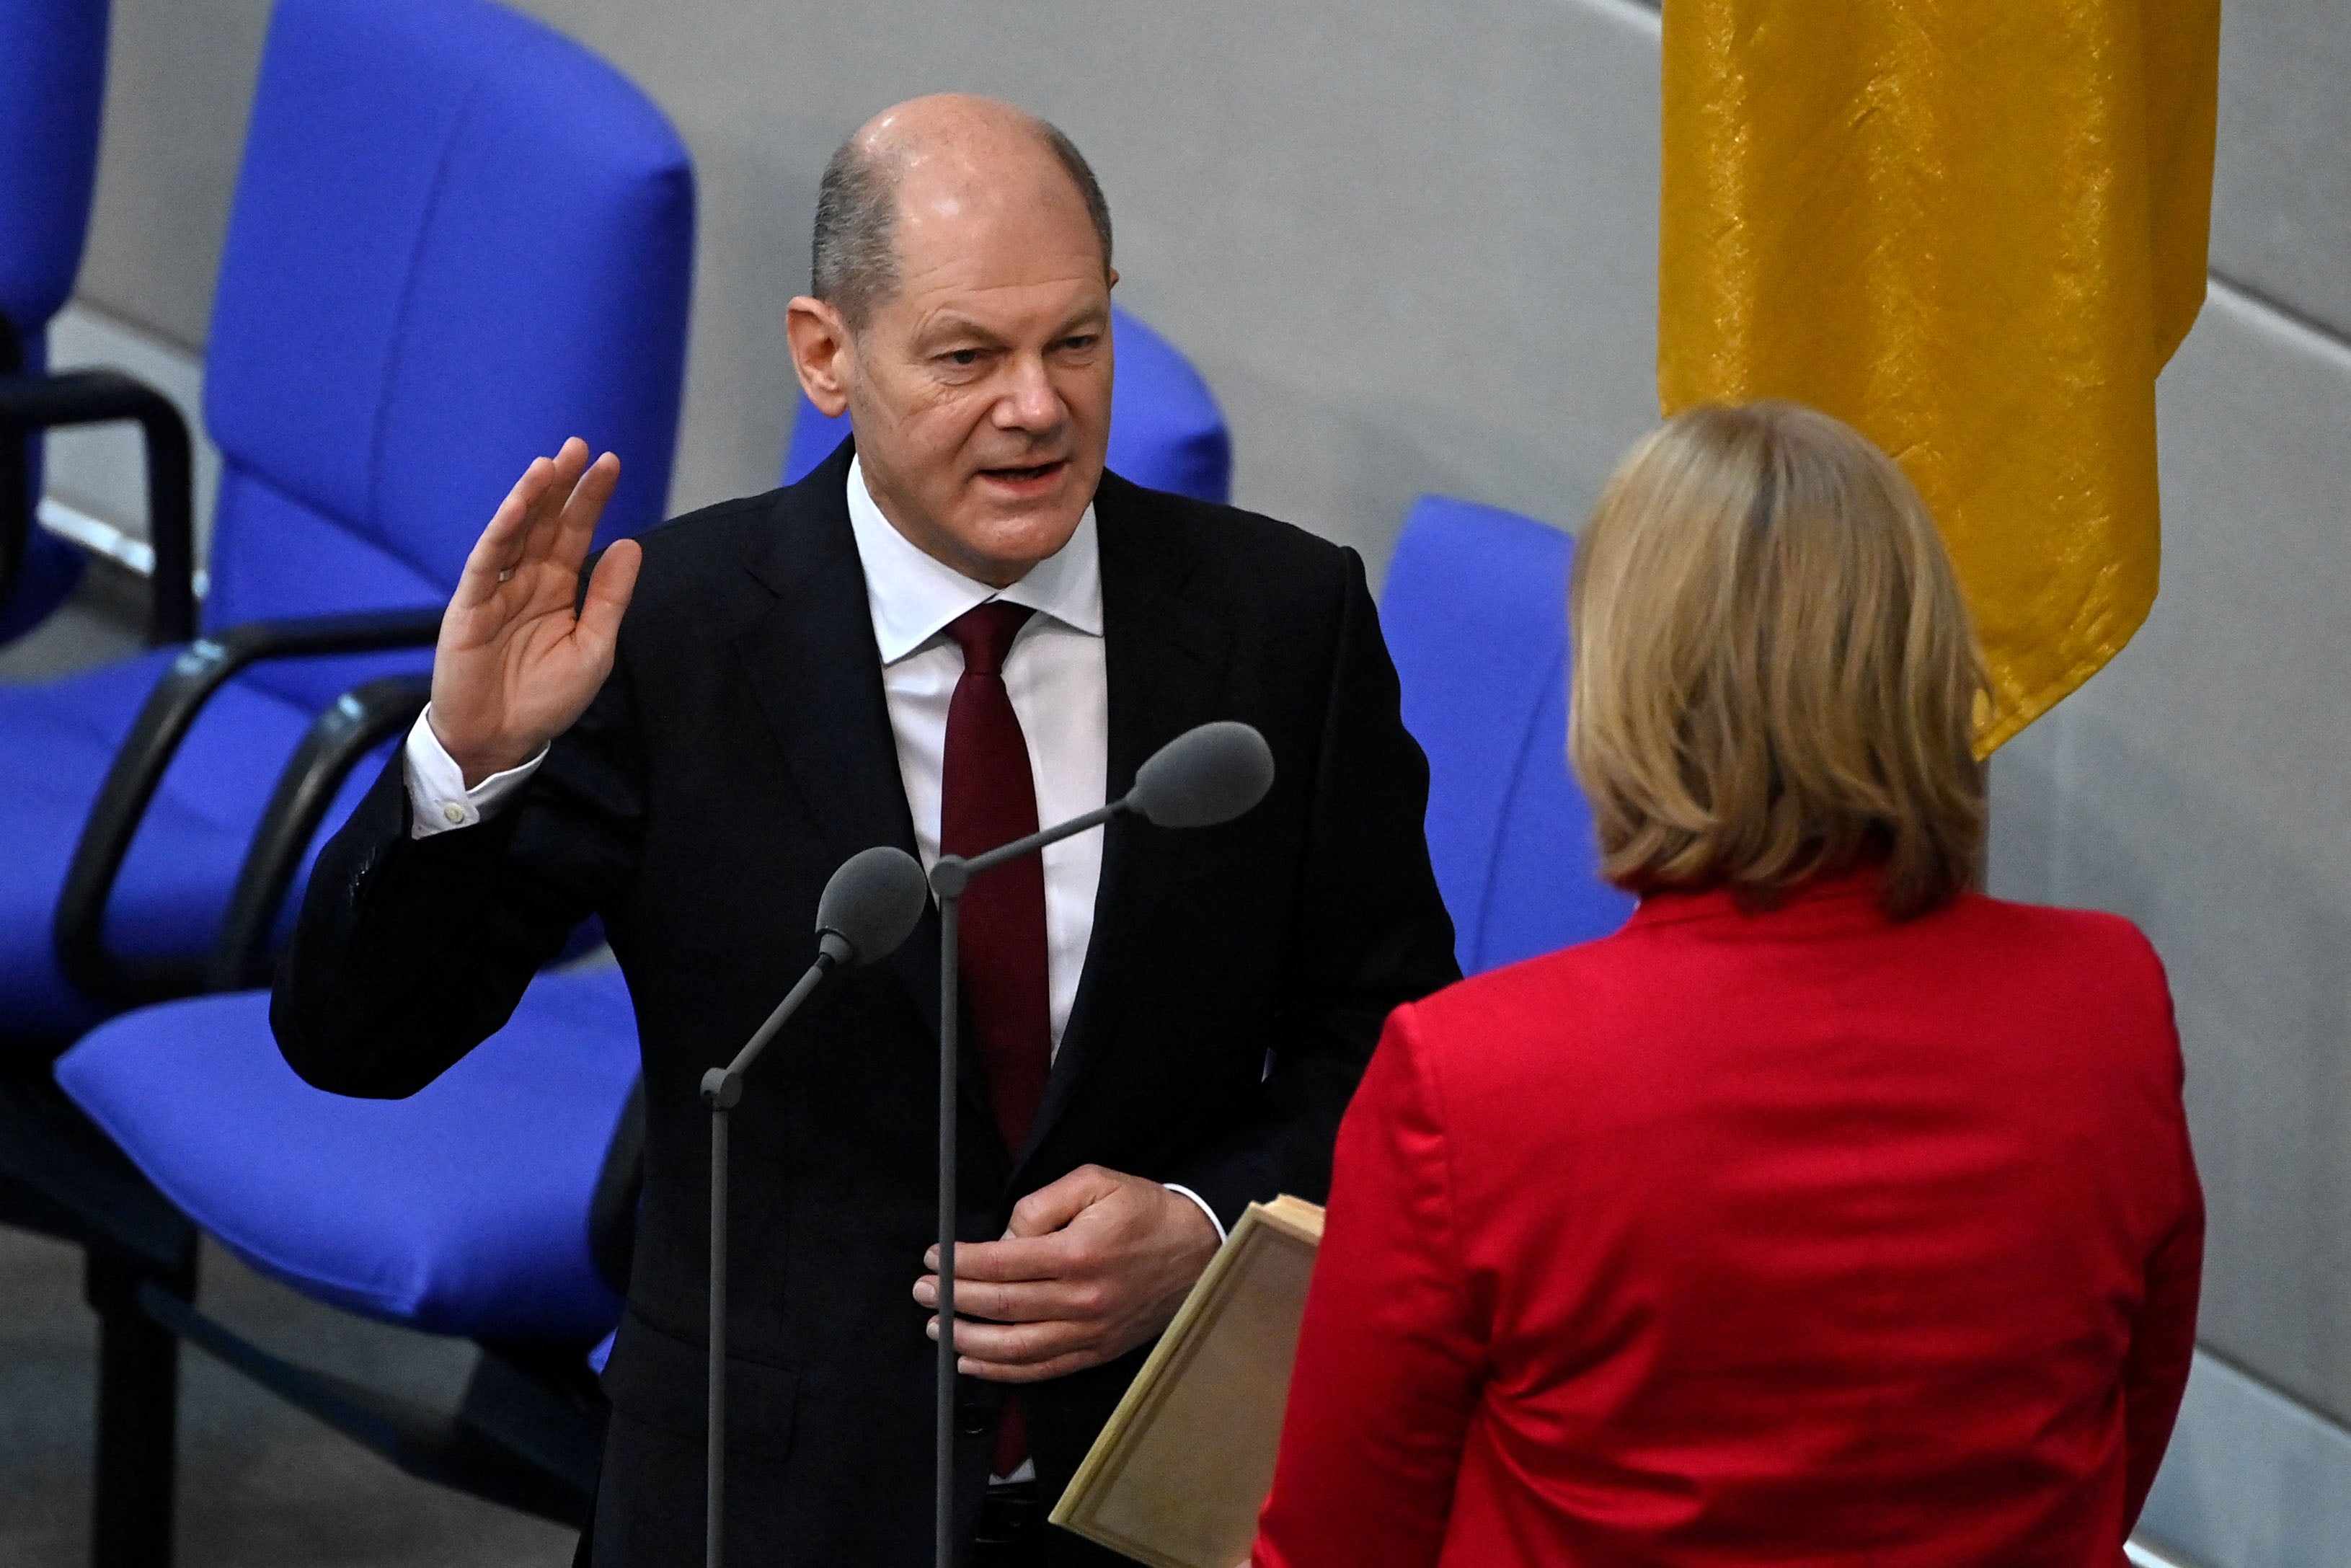 German chancellor Olaf Scholz takes the oath from president of the Bundestag